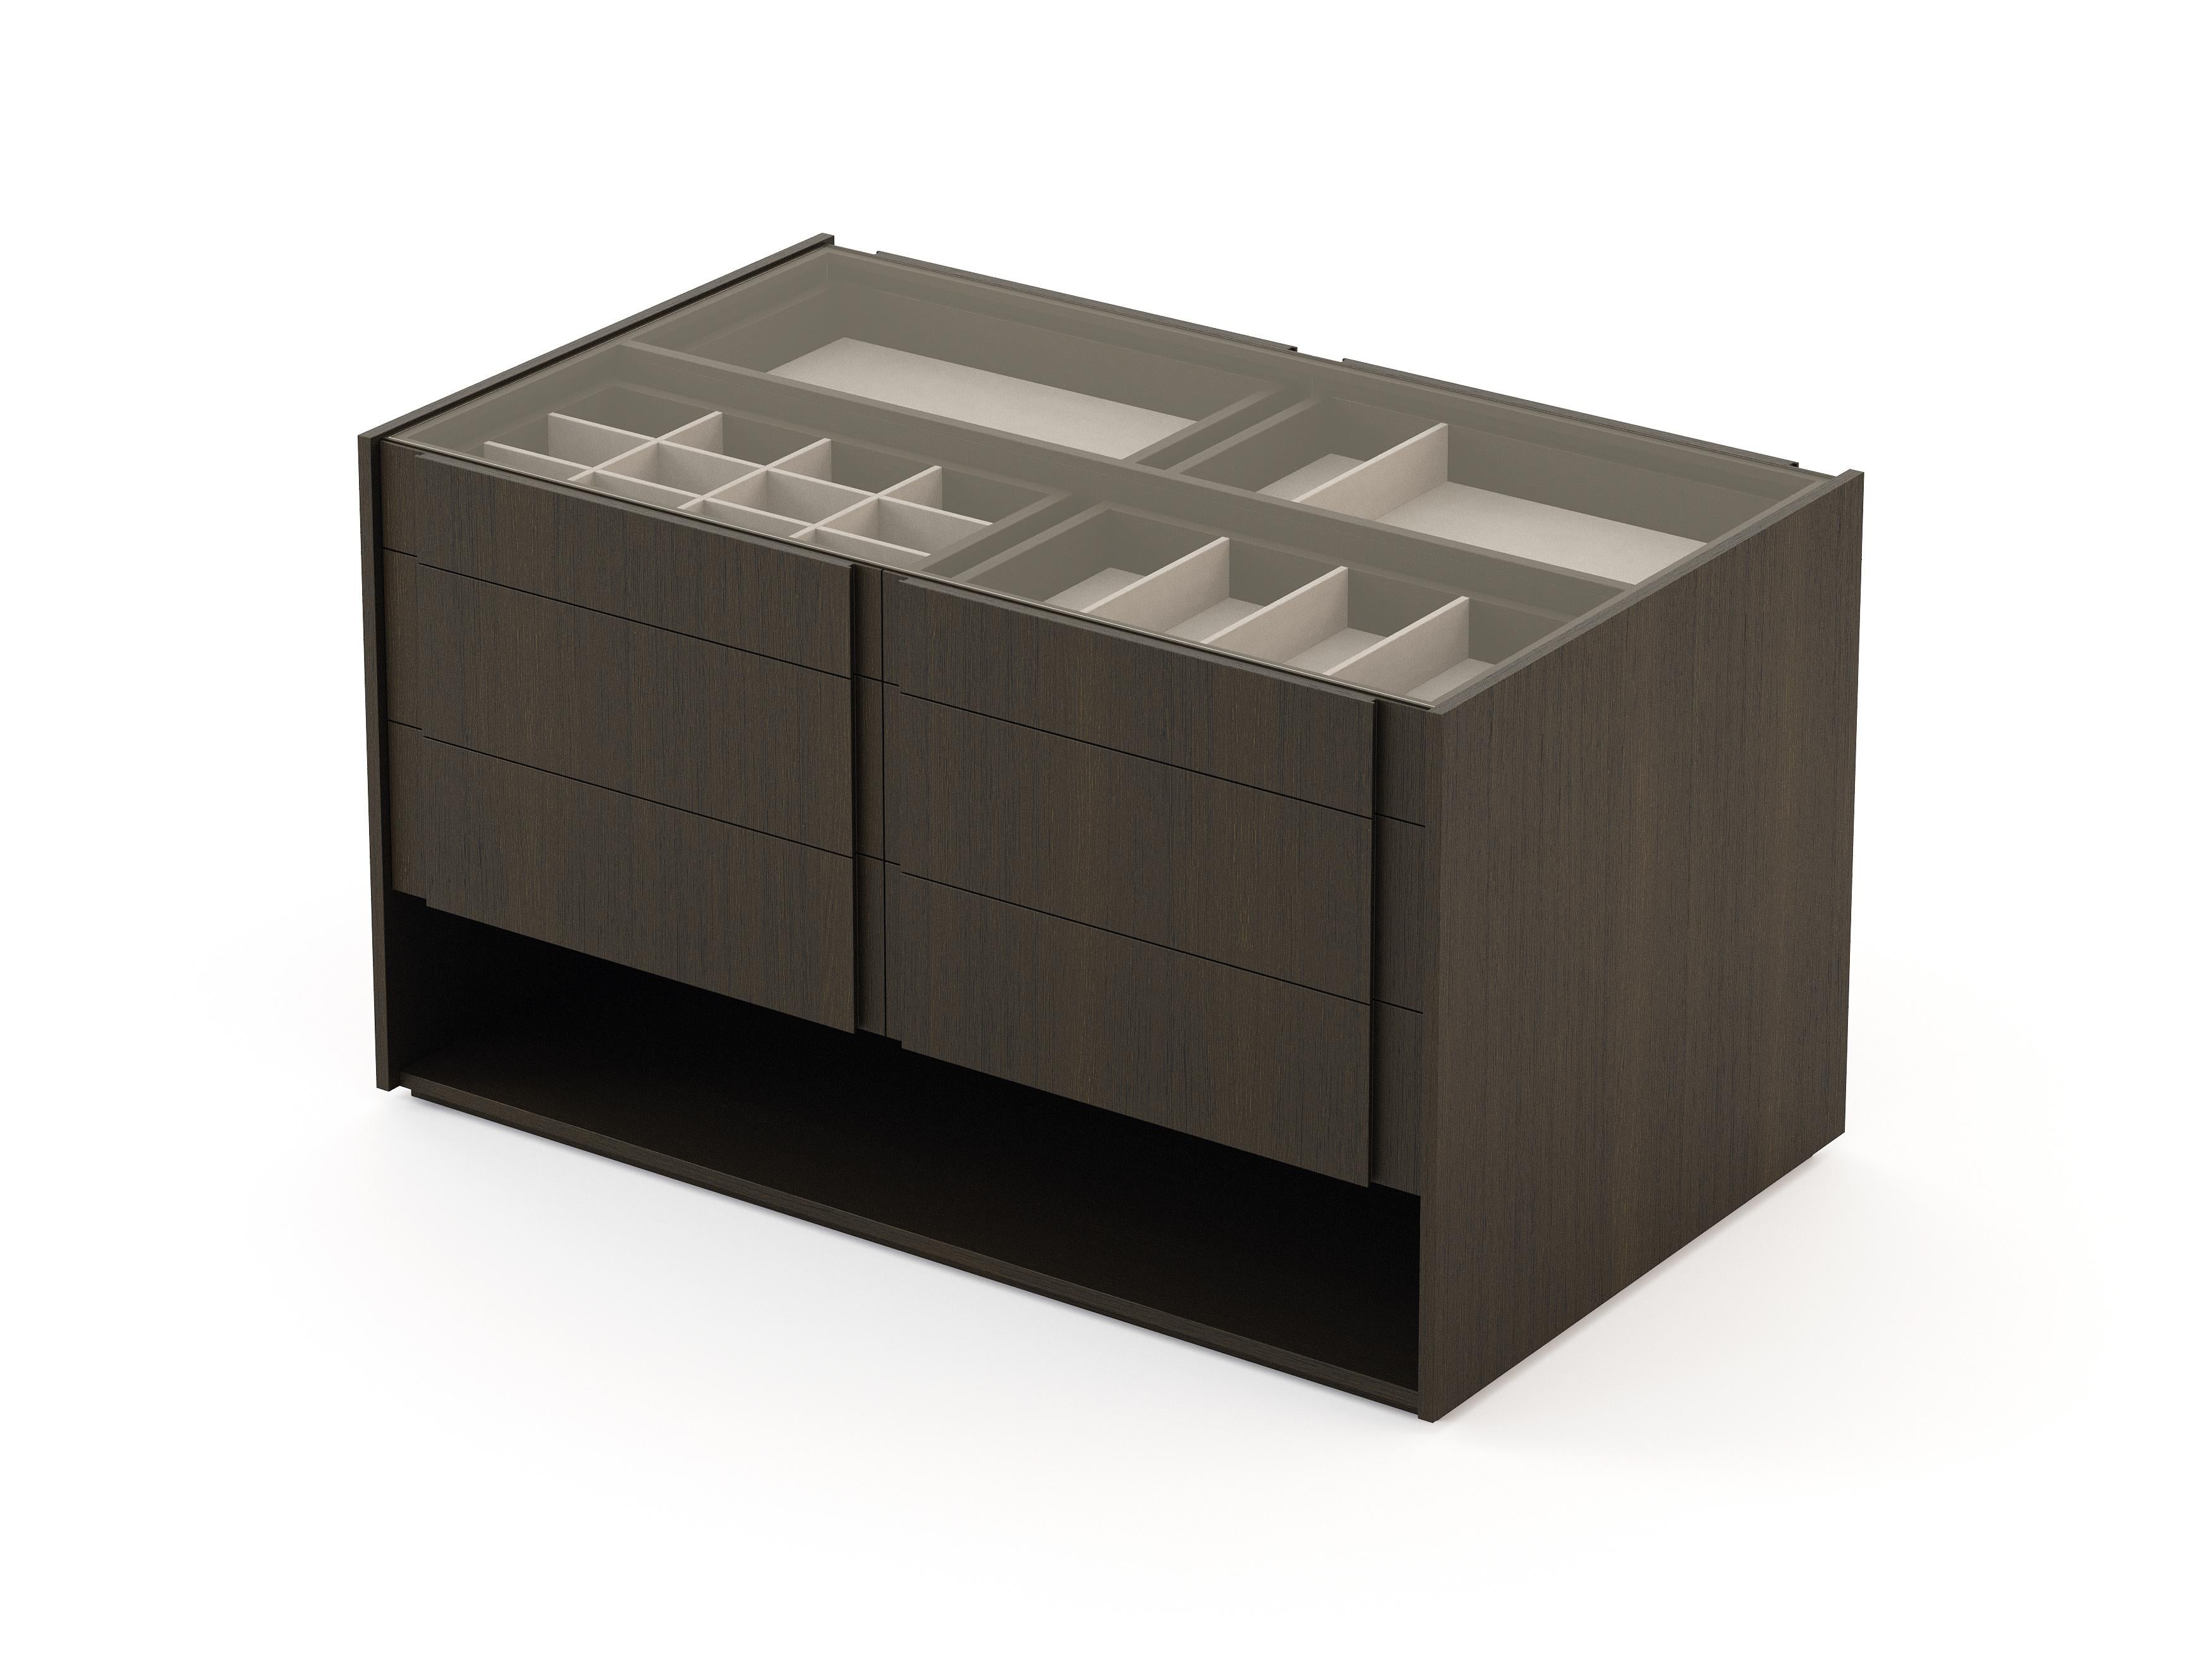 Portuguese Modern Sevilha Island Chest of Drawers Made with Oak, Glass and Suede Details For Sale